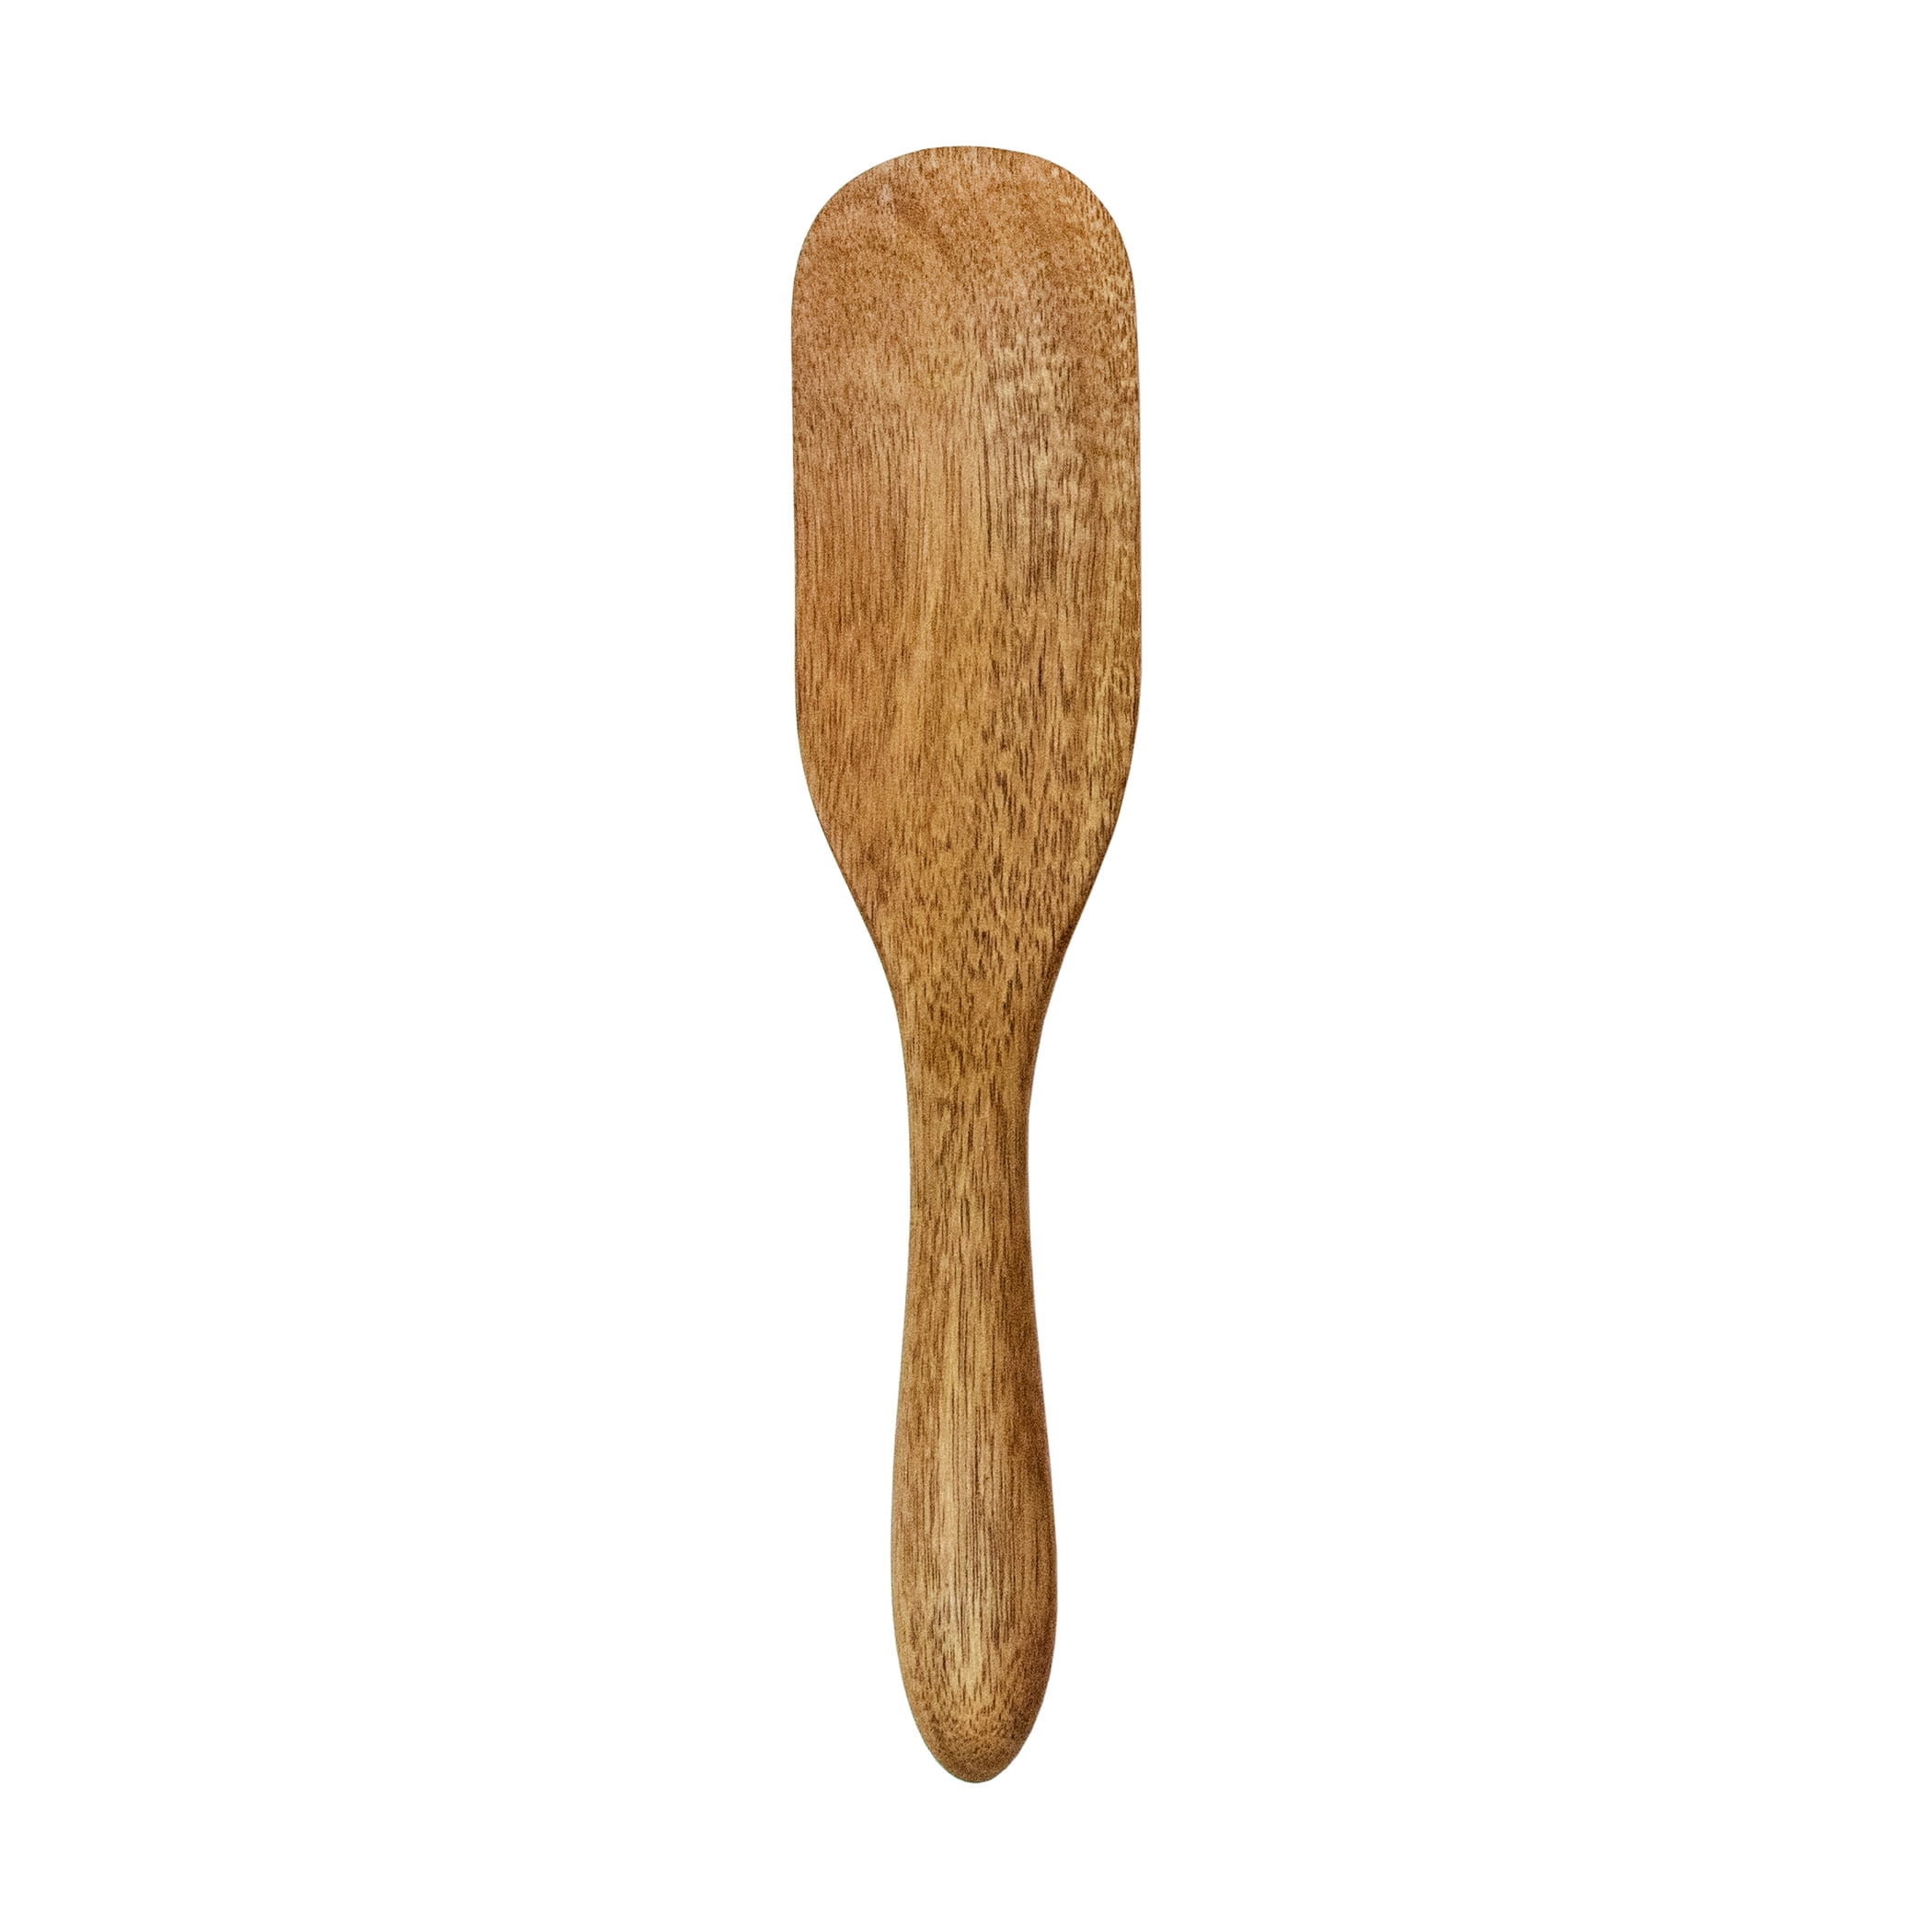 Homerun Products 4pc Acacia Hardwood Spurtle Cooking Utensils